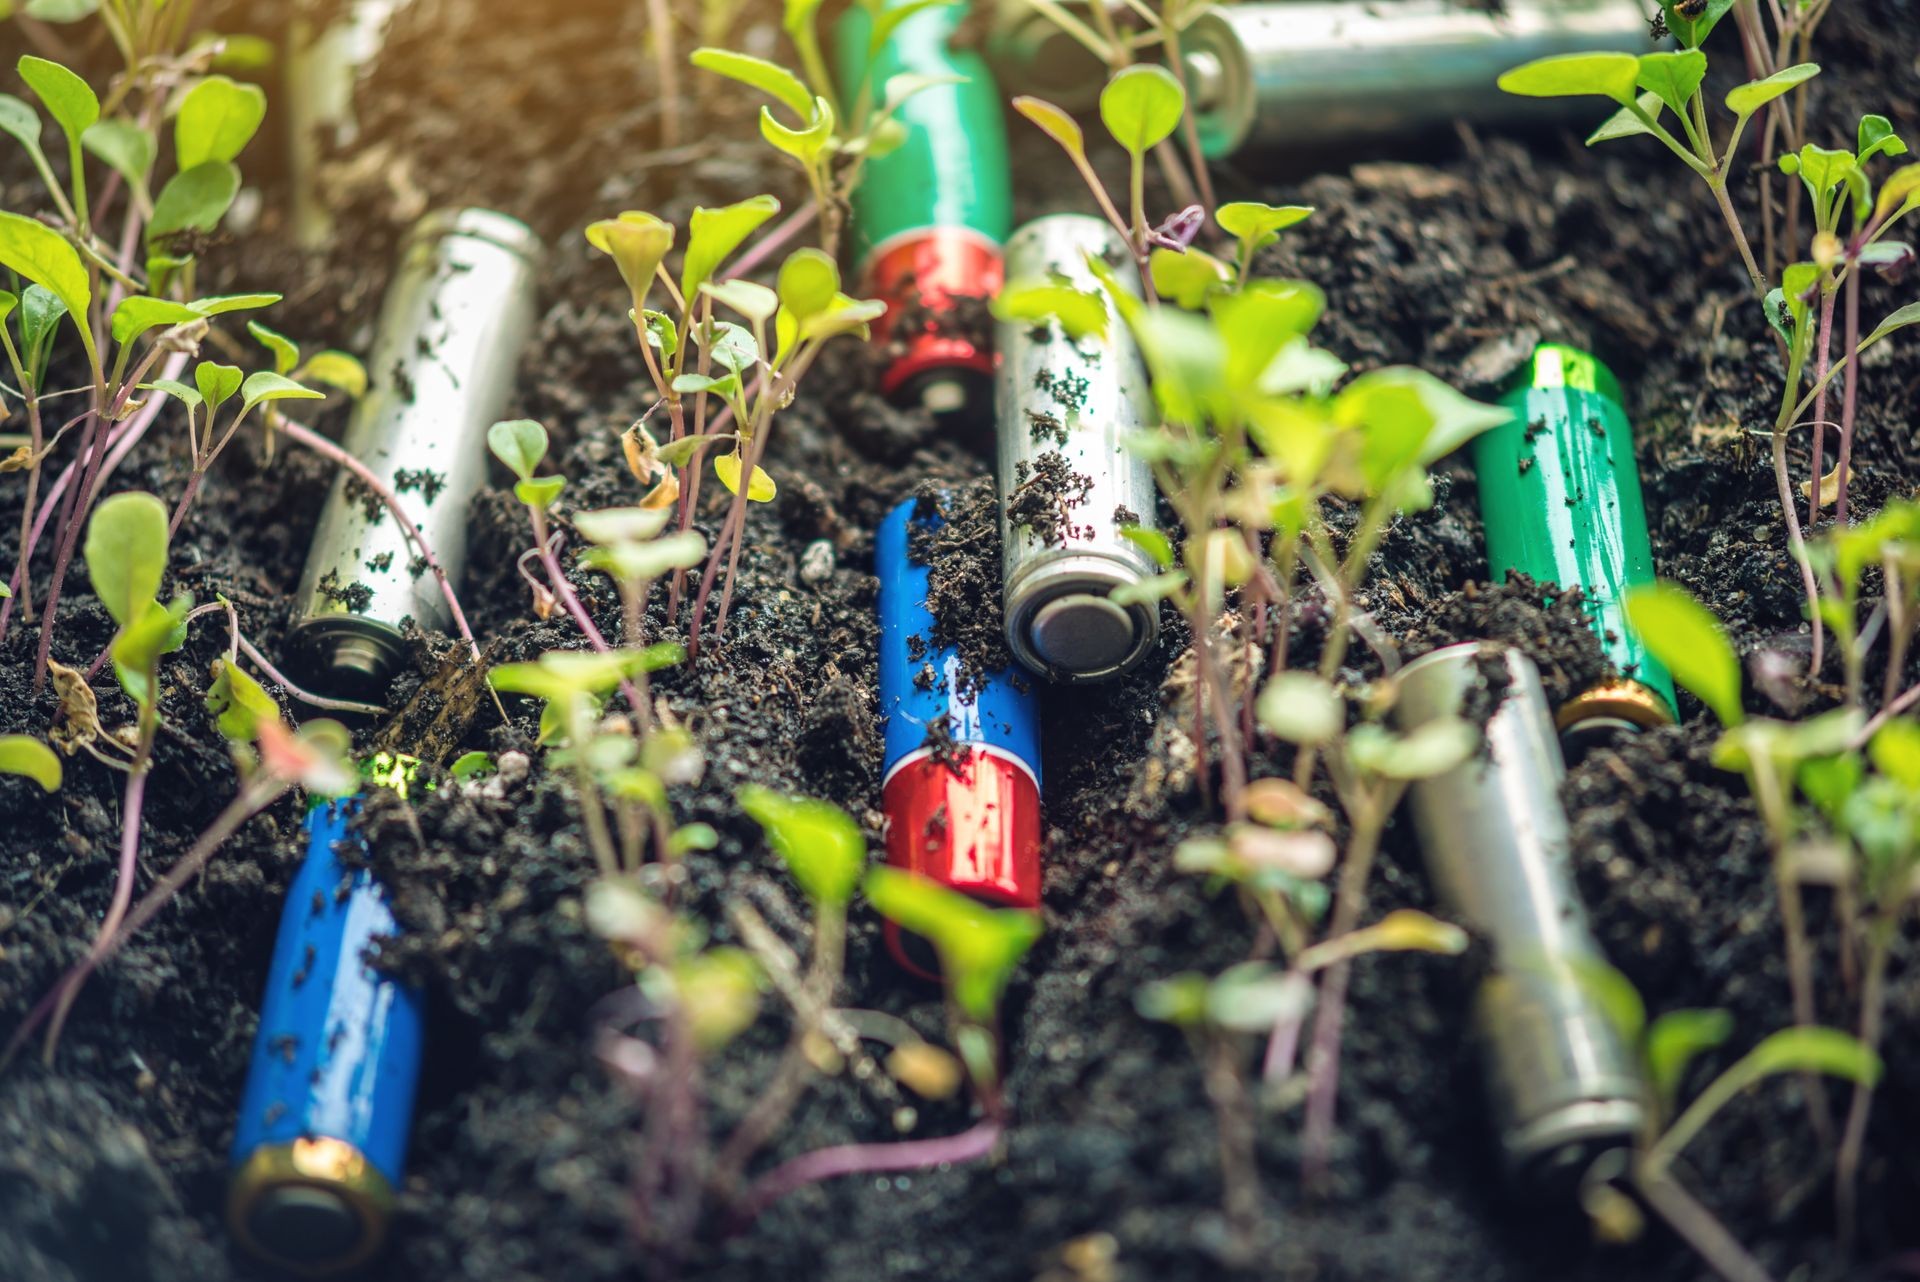 Used alkaline batteries lie in the soil where plants grow. The concept of environmental pollution with toxic household waste